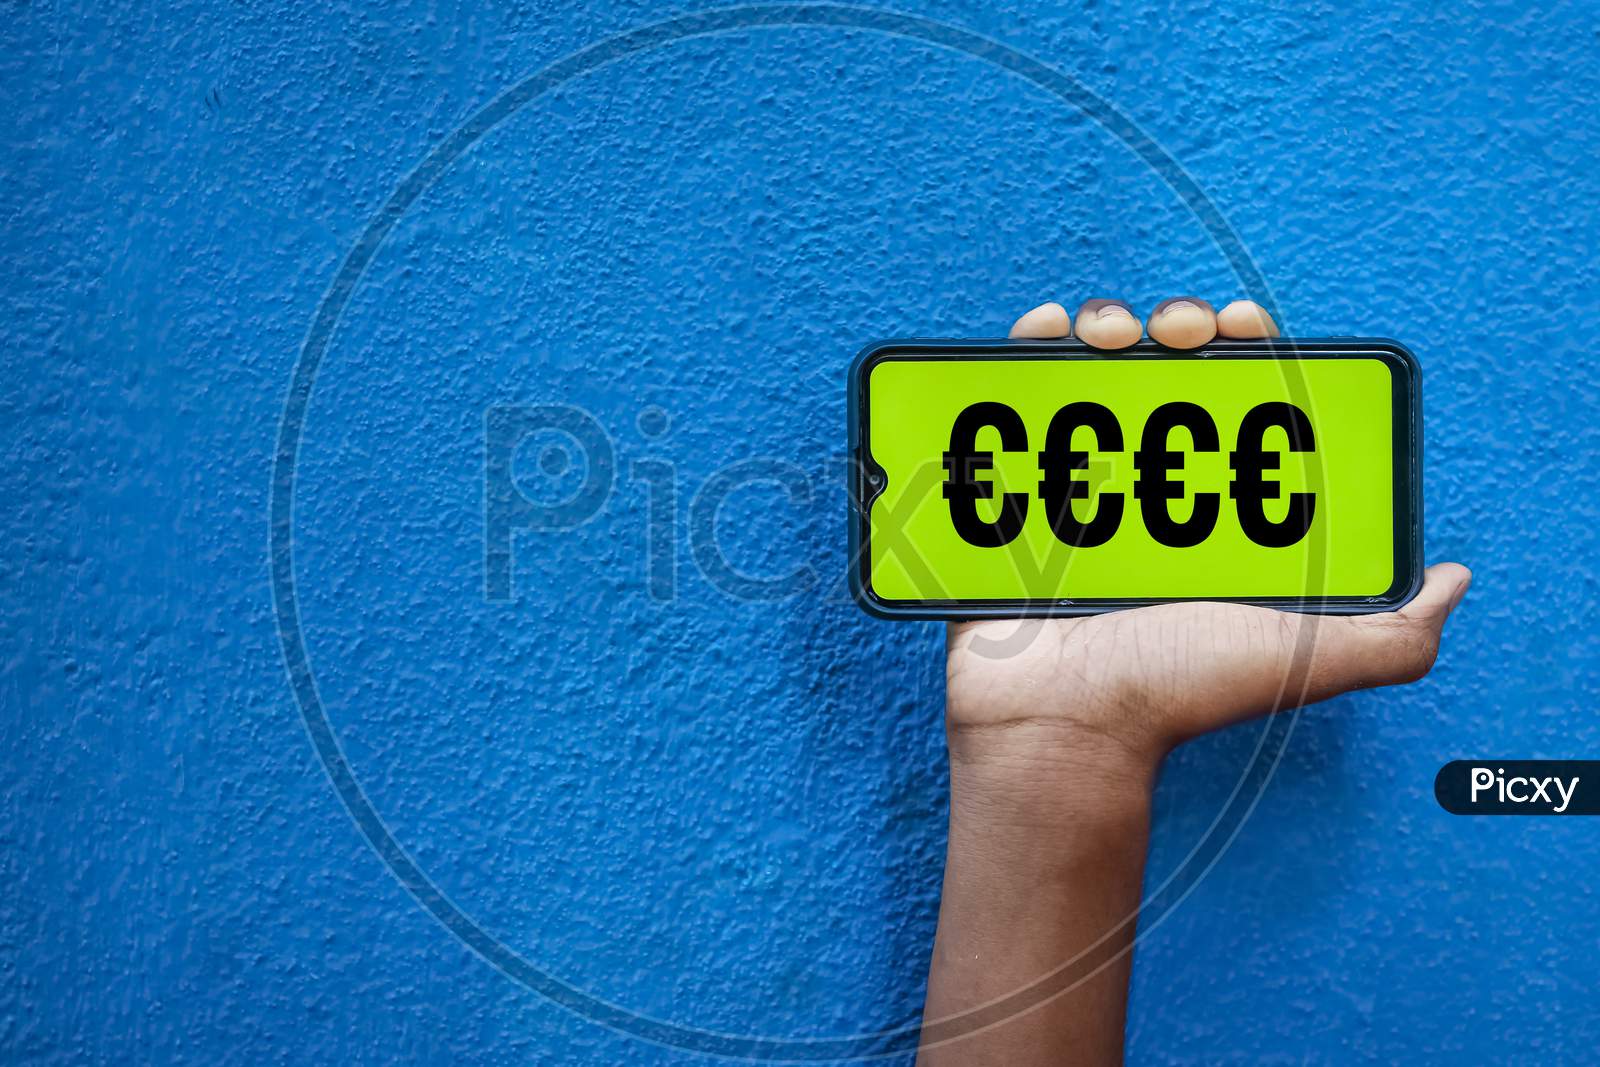 Eur Currency Symbol On Smart Phone Screen Isolated On Blue Background With Copy Space For Text. Person Holding Mobile On His Hand And Showing Front Of The Screen Eur Currency Symbol.